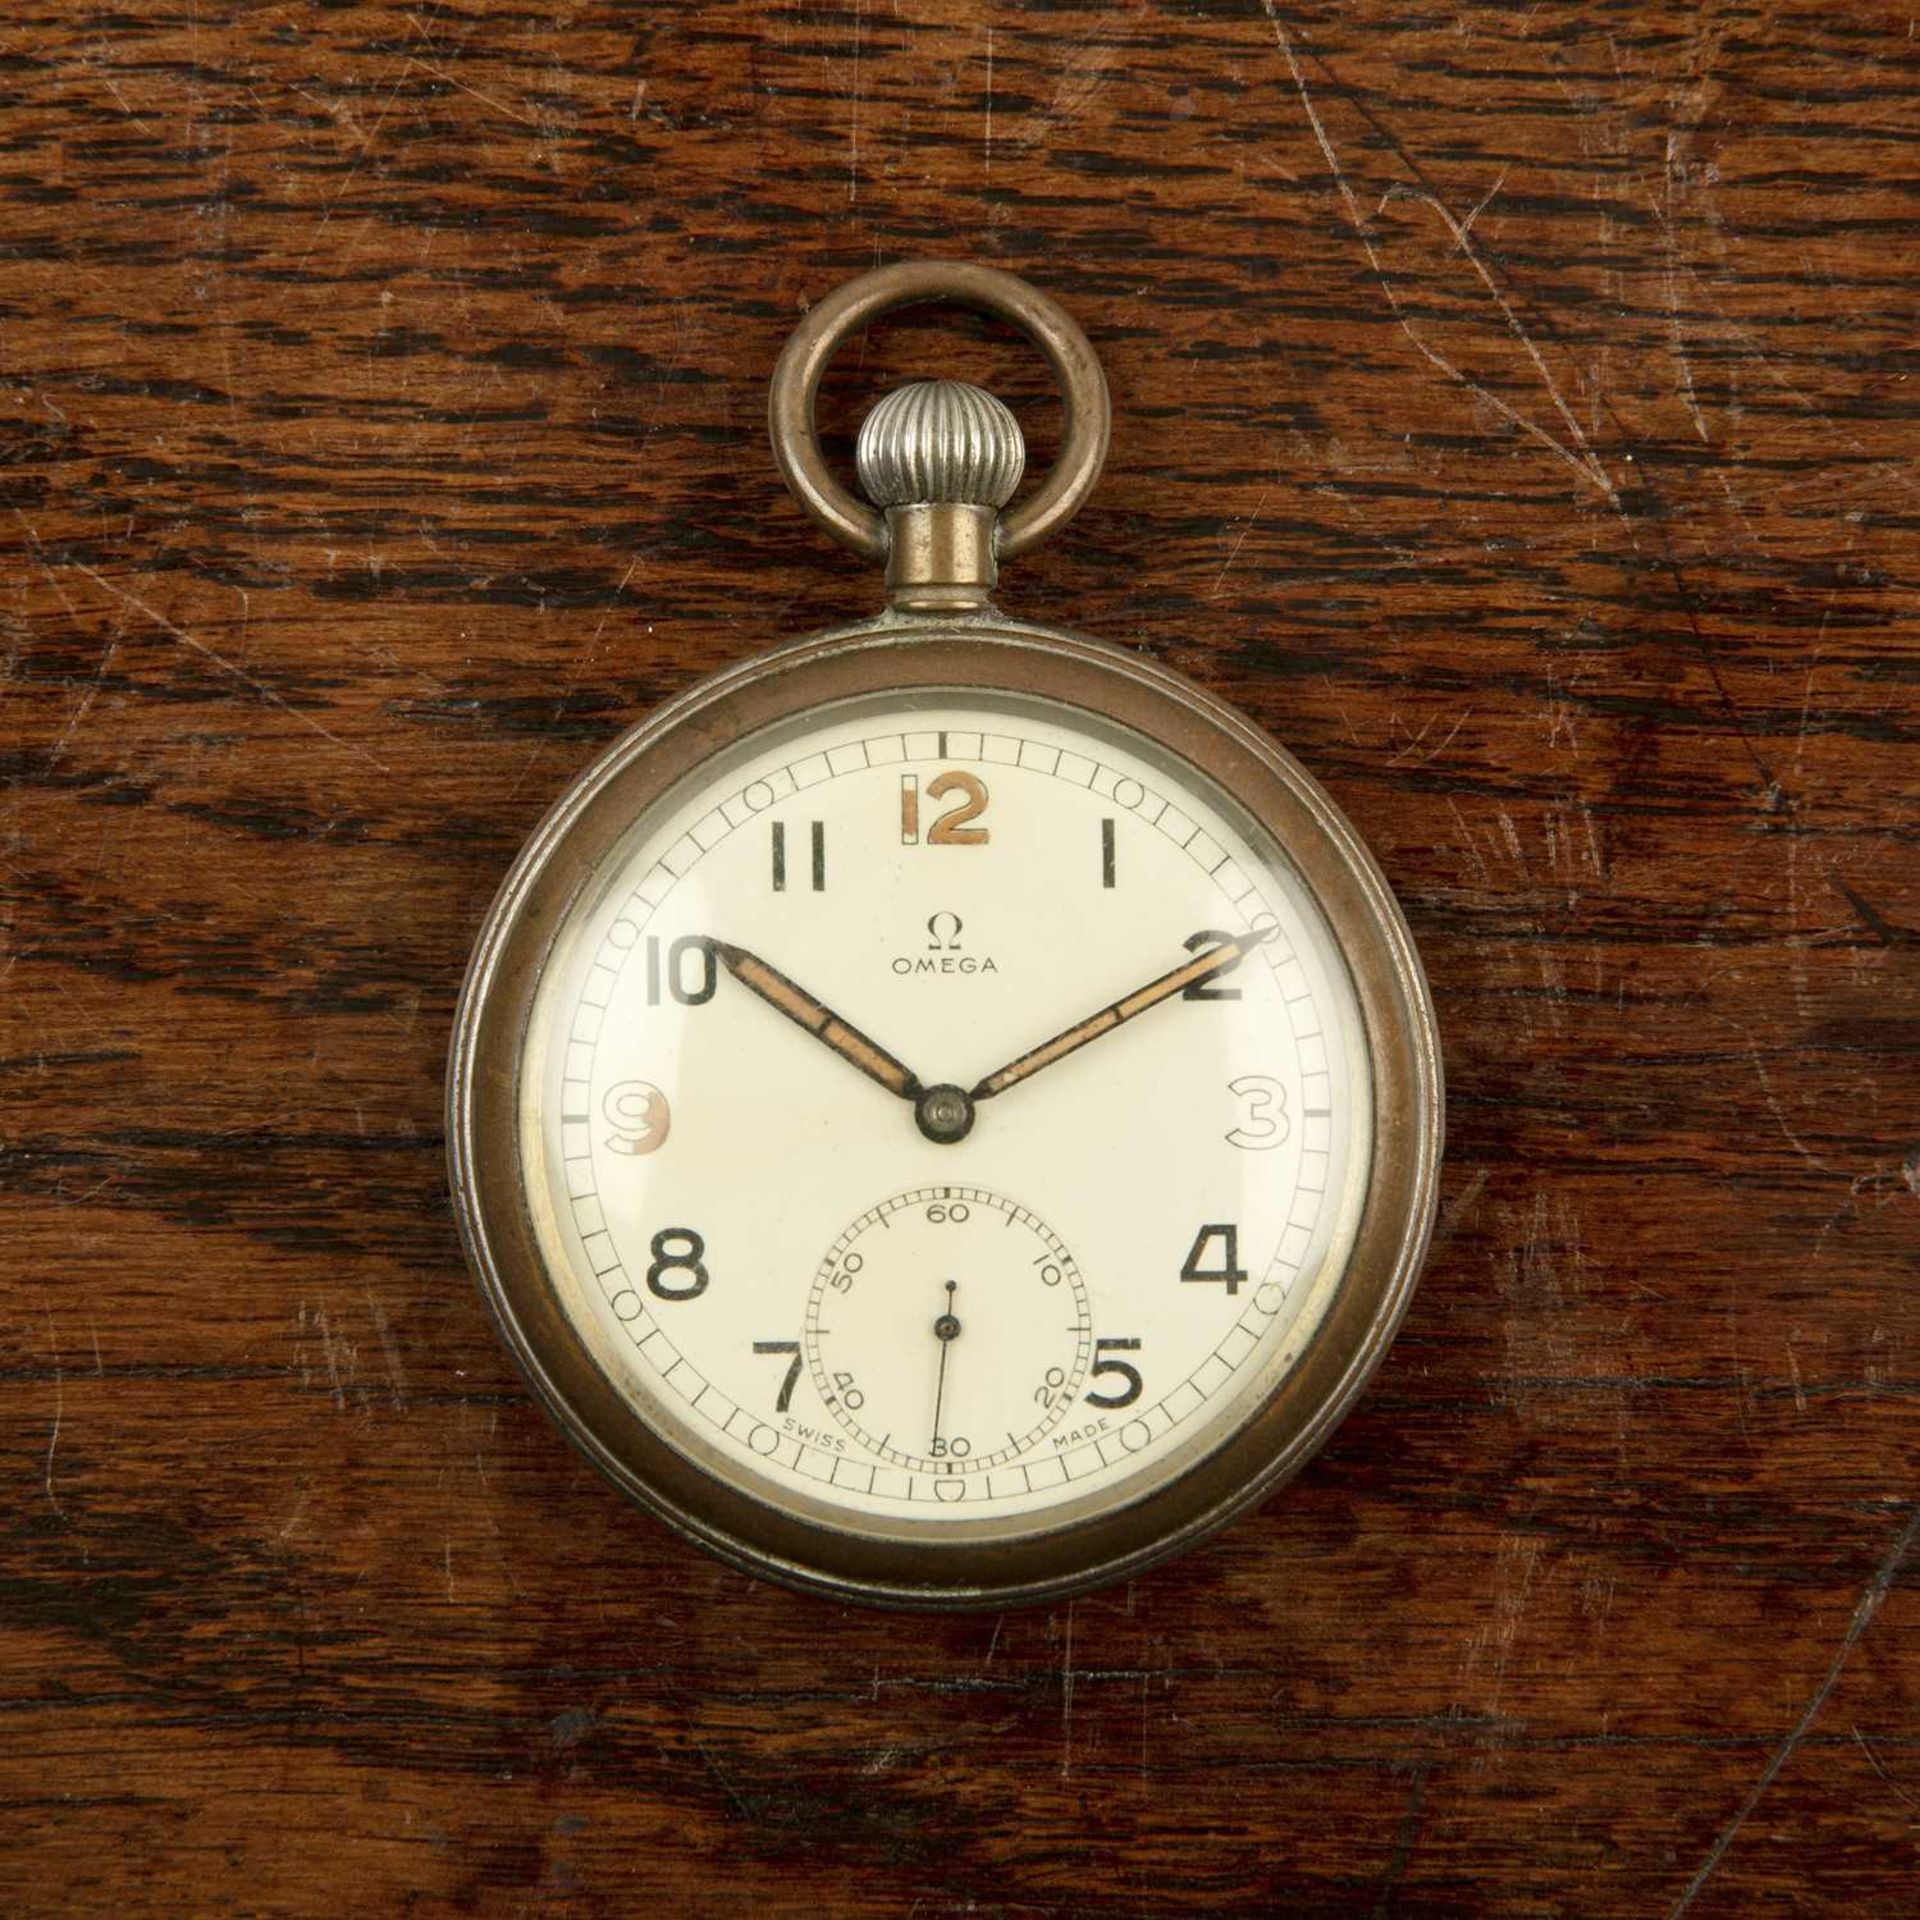 Omega GSTP military pocketwatch in a steel case, the white dial with painted numerals and subsidiary